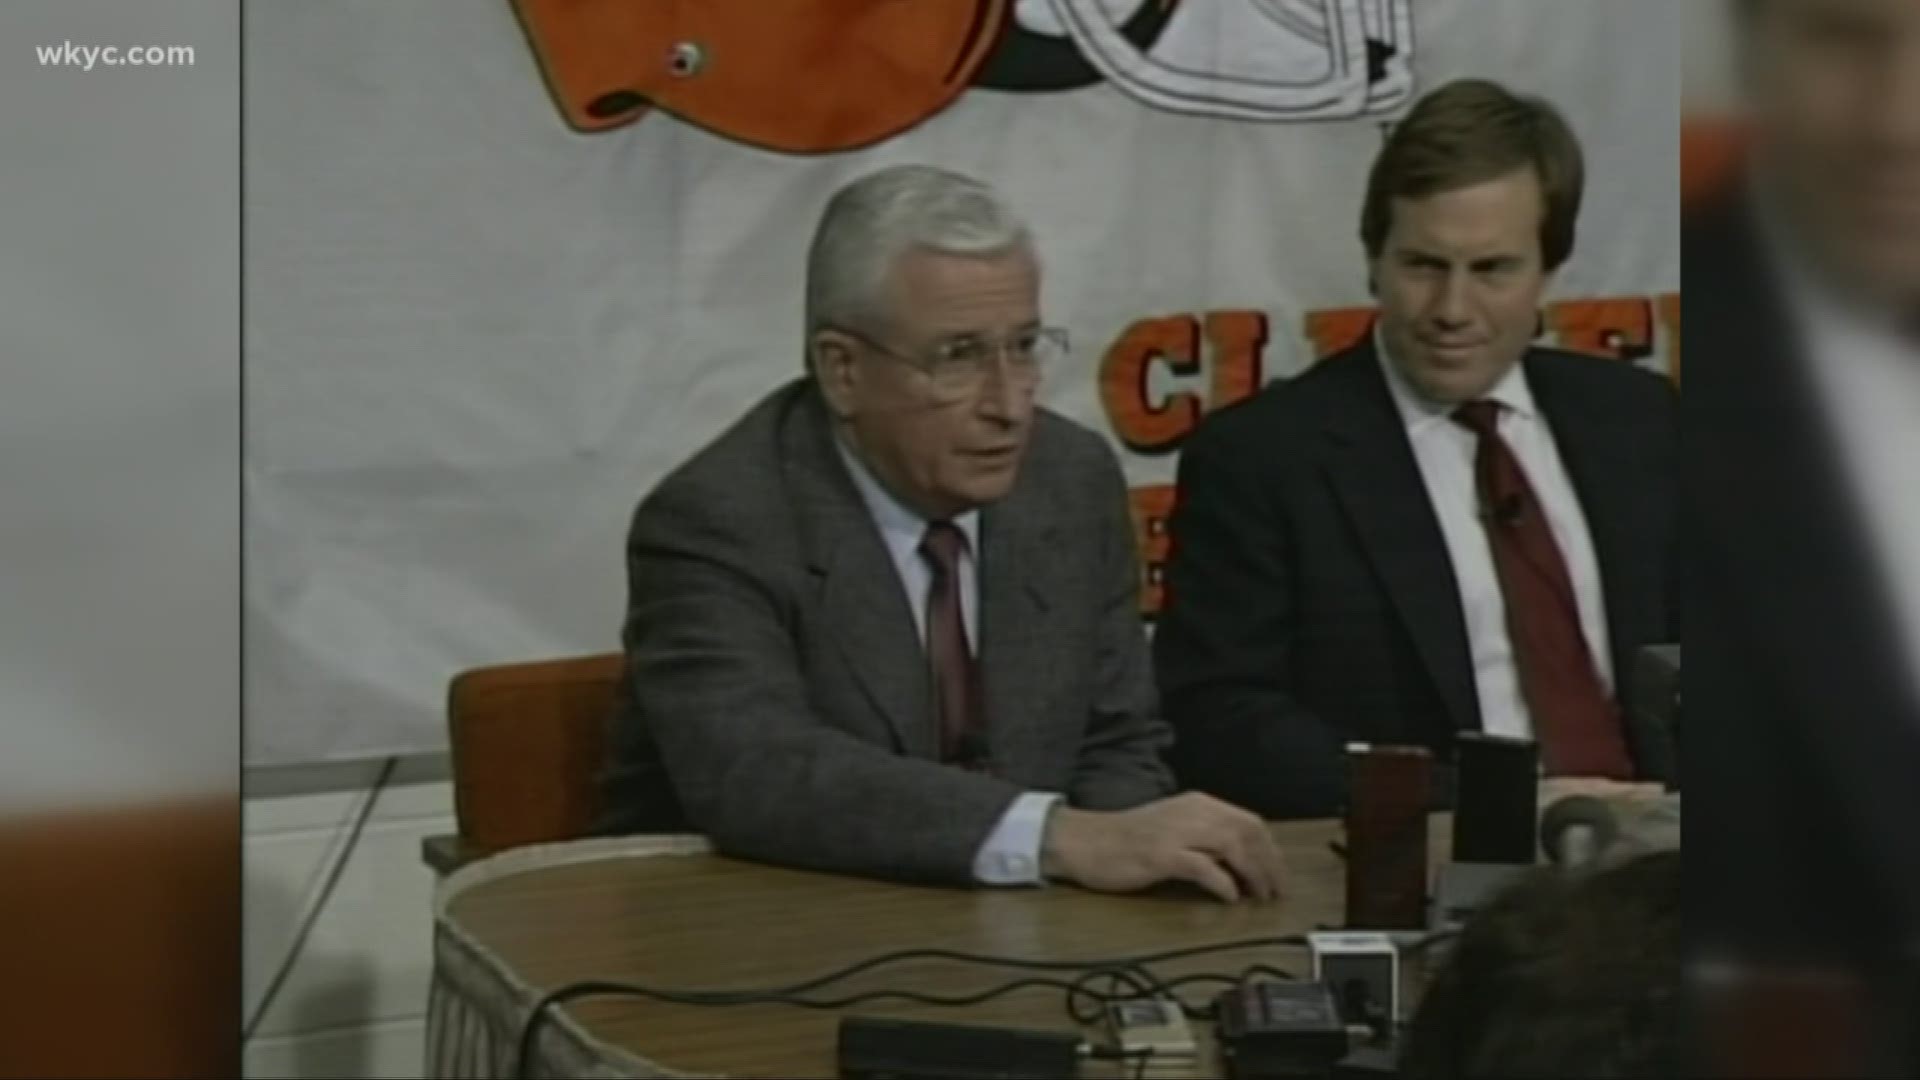 Former Browns and Ravens owner Art Modell was not one of the three contributors selected to the Hall. Steve Sabol, Paul Tagliabue, and George Young were elected.